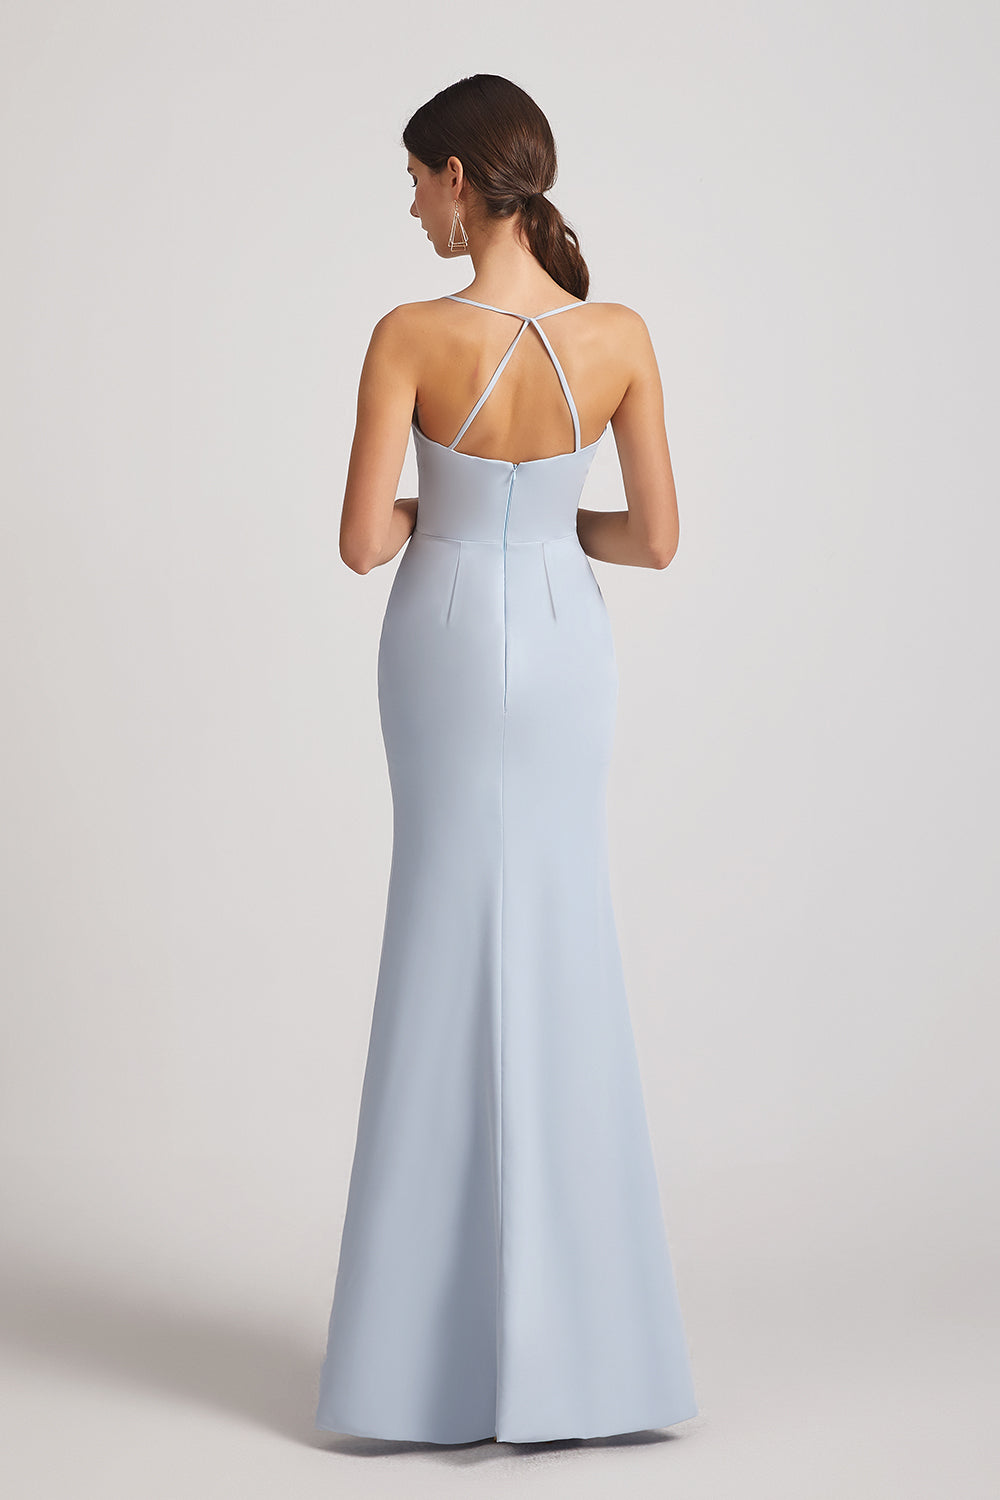 open back bridesmaid gowns